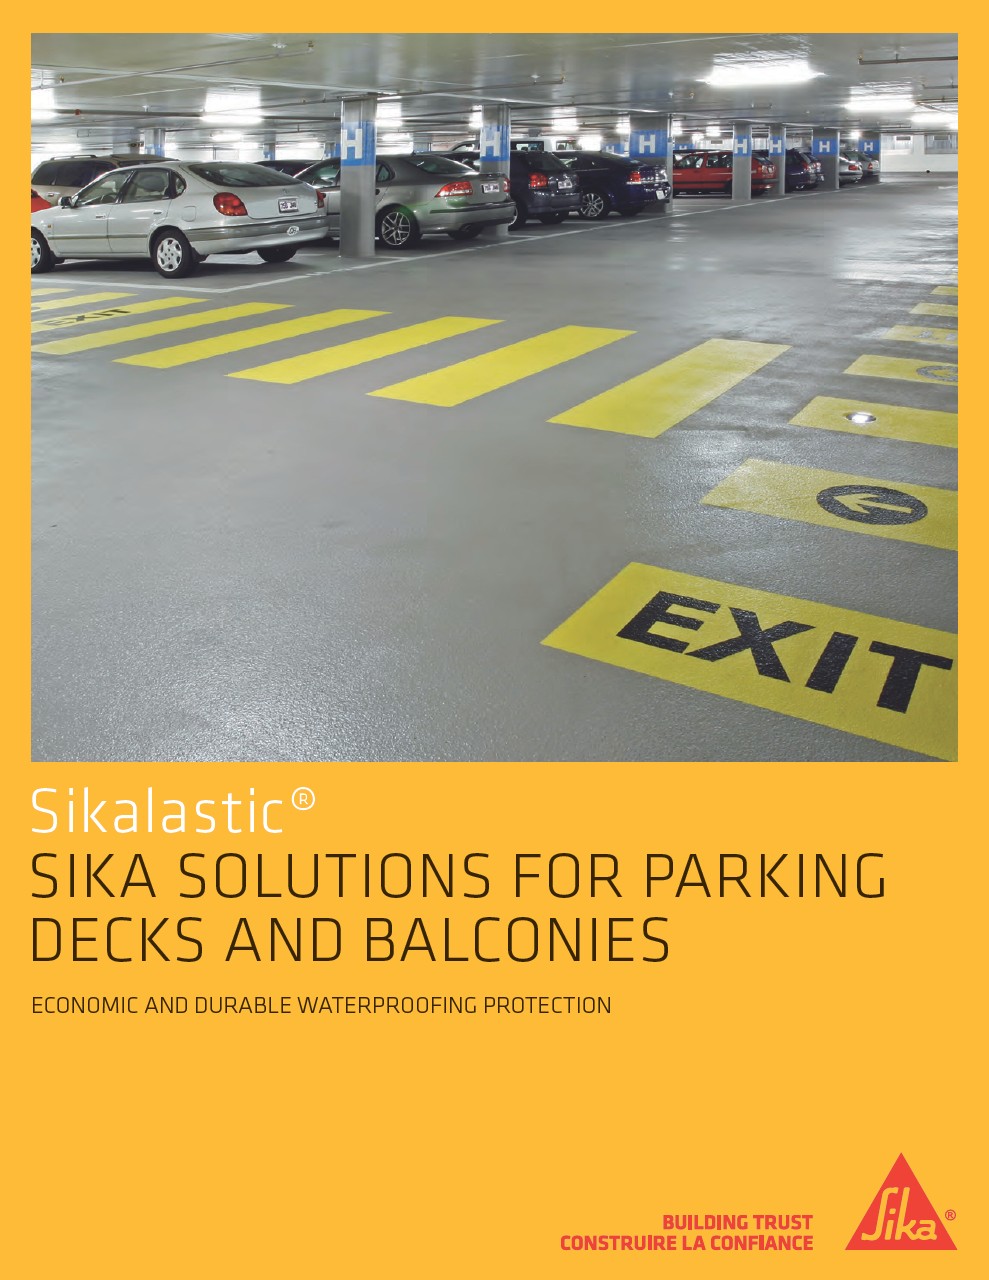 Sikalastic® - Sika Solutions for Parking Decks and Balconies